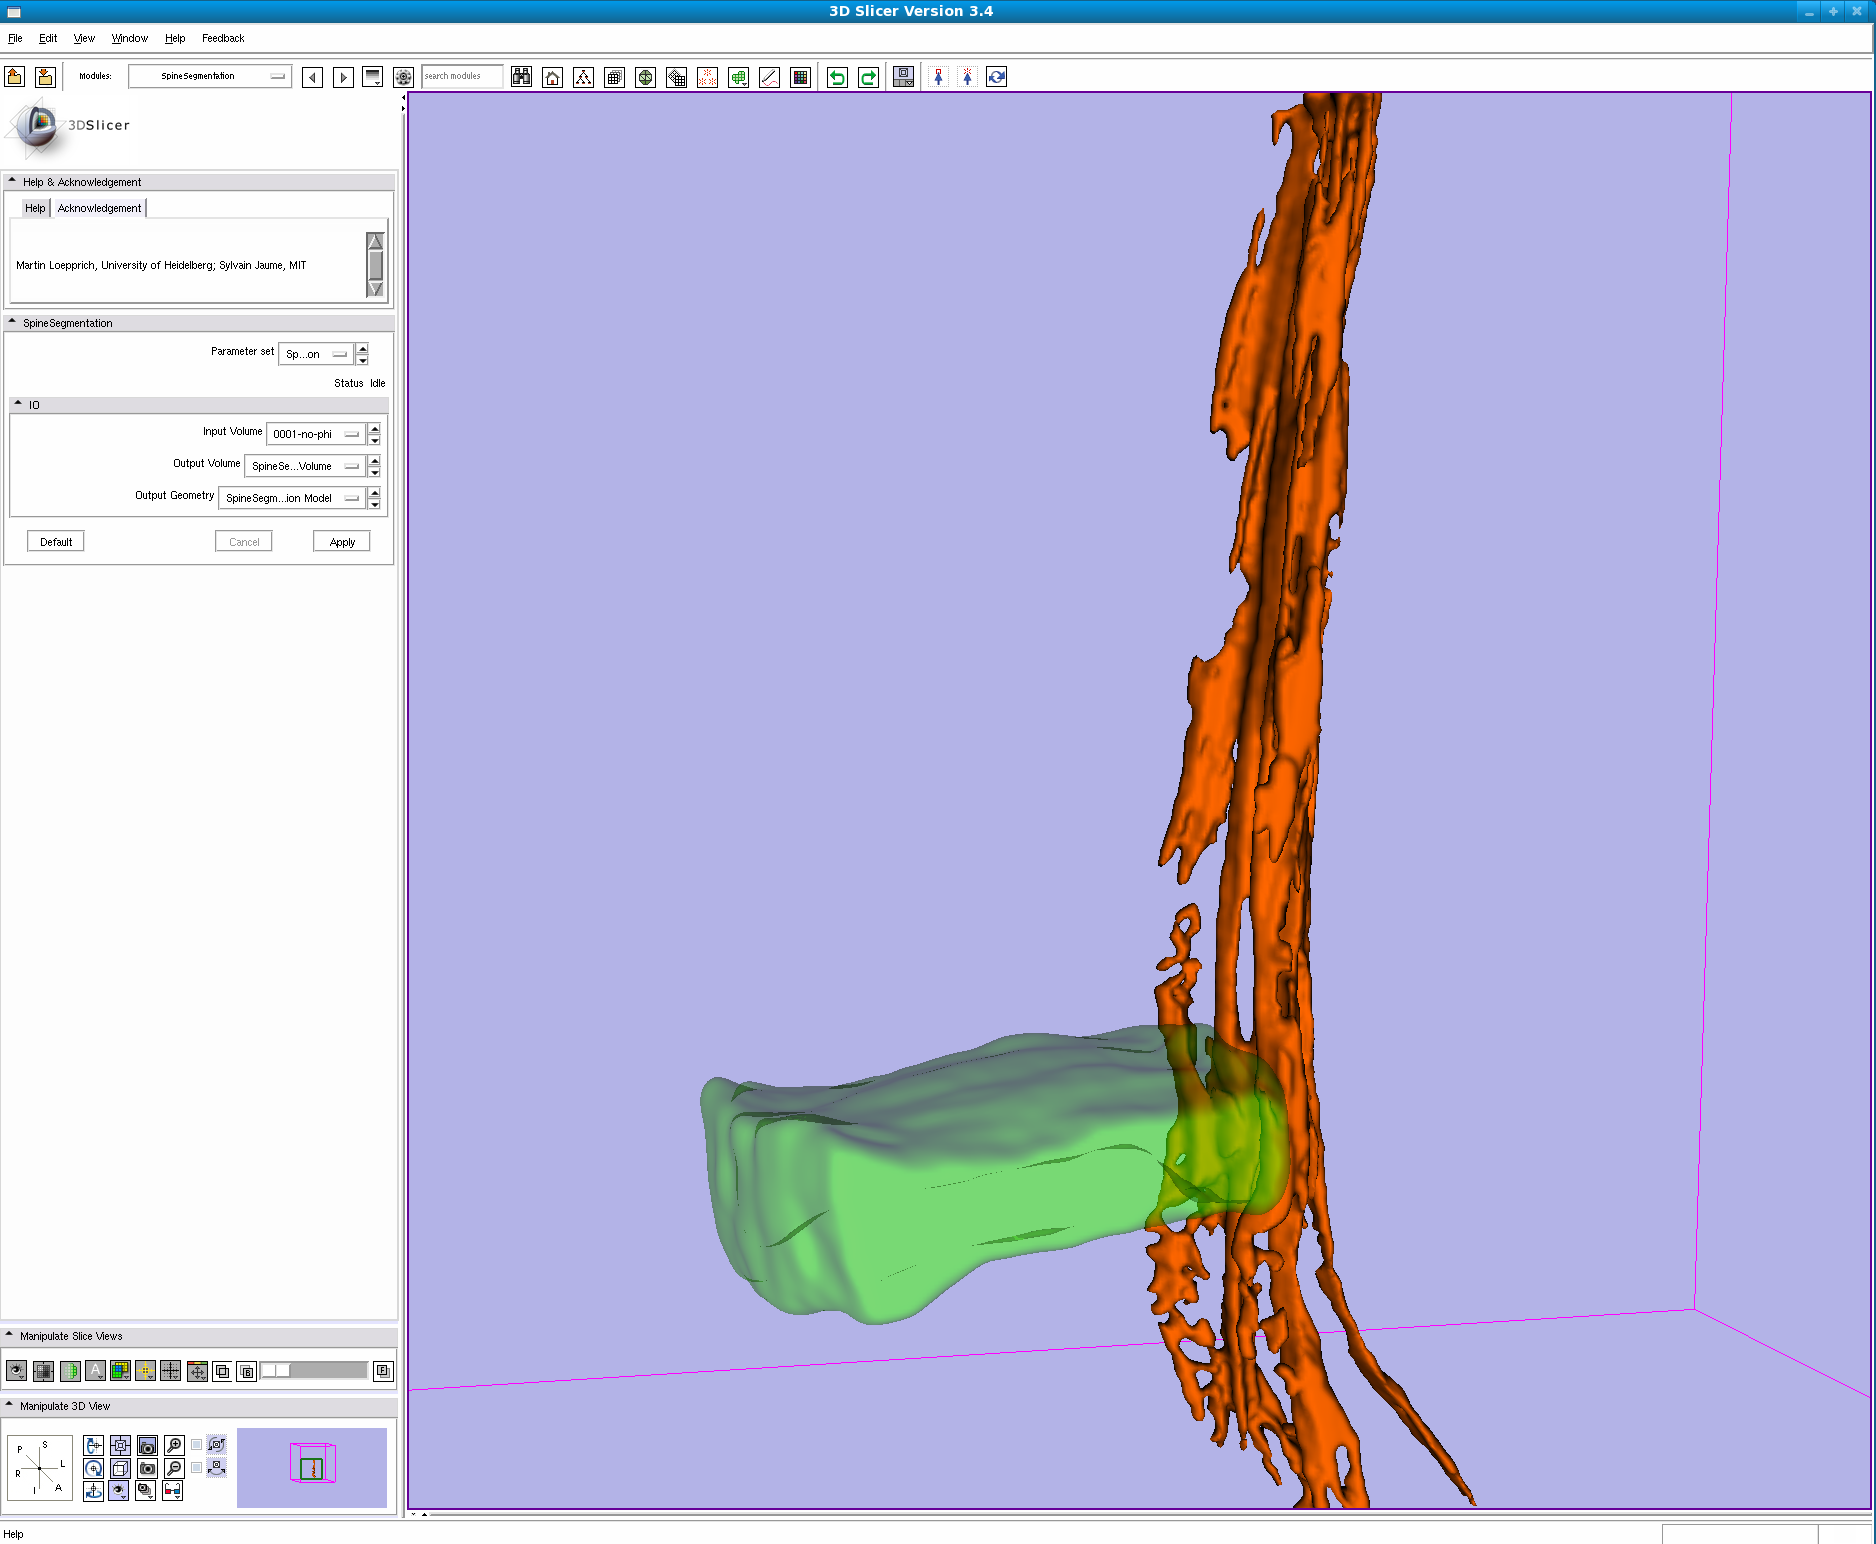 Results of the SpineSegmentation module in Slicer 3.5